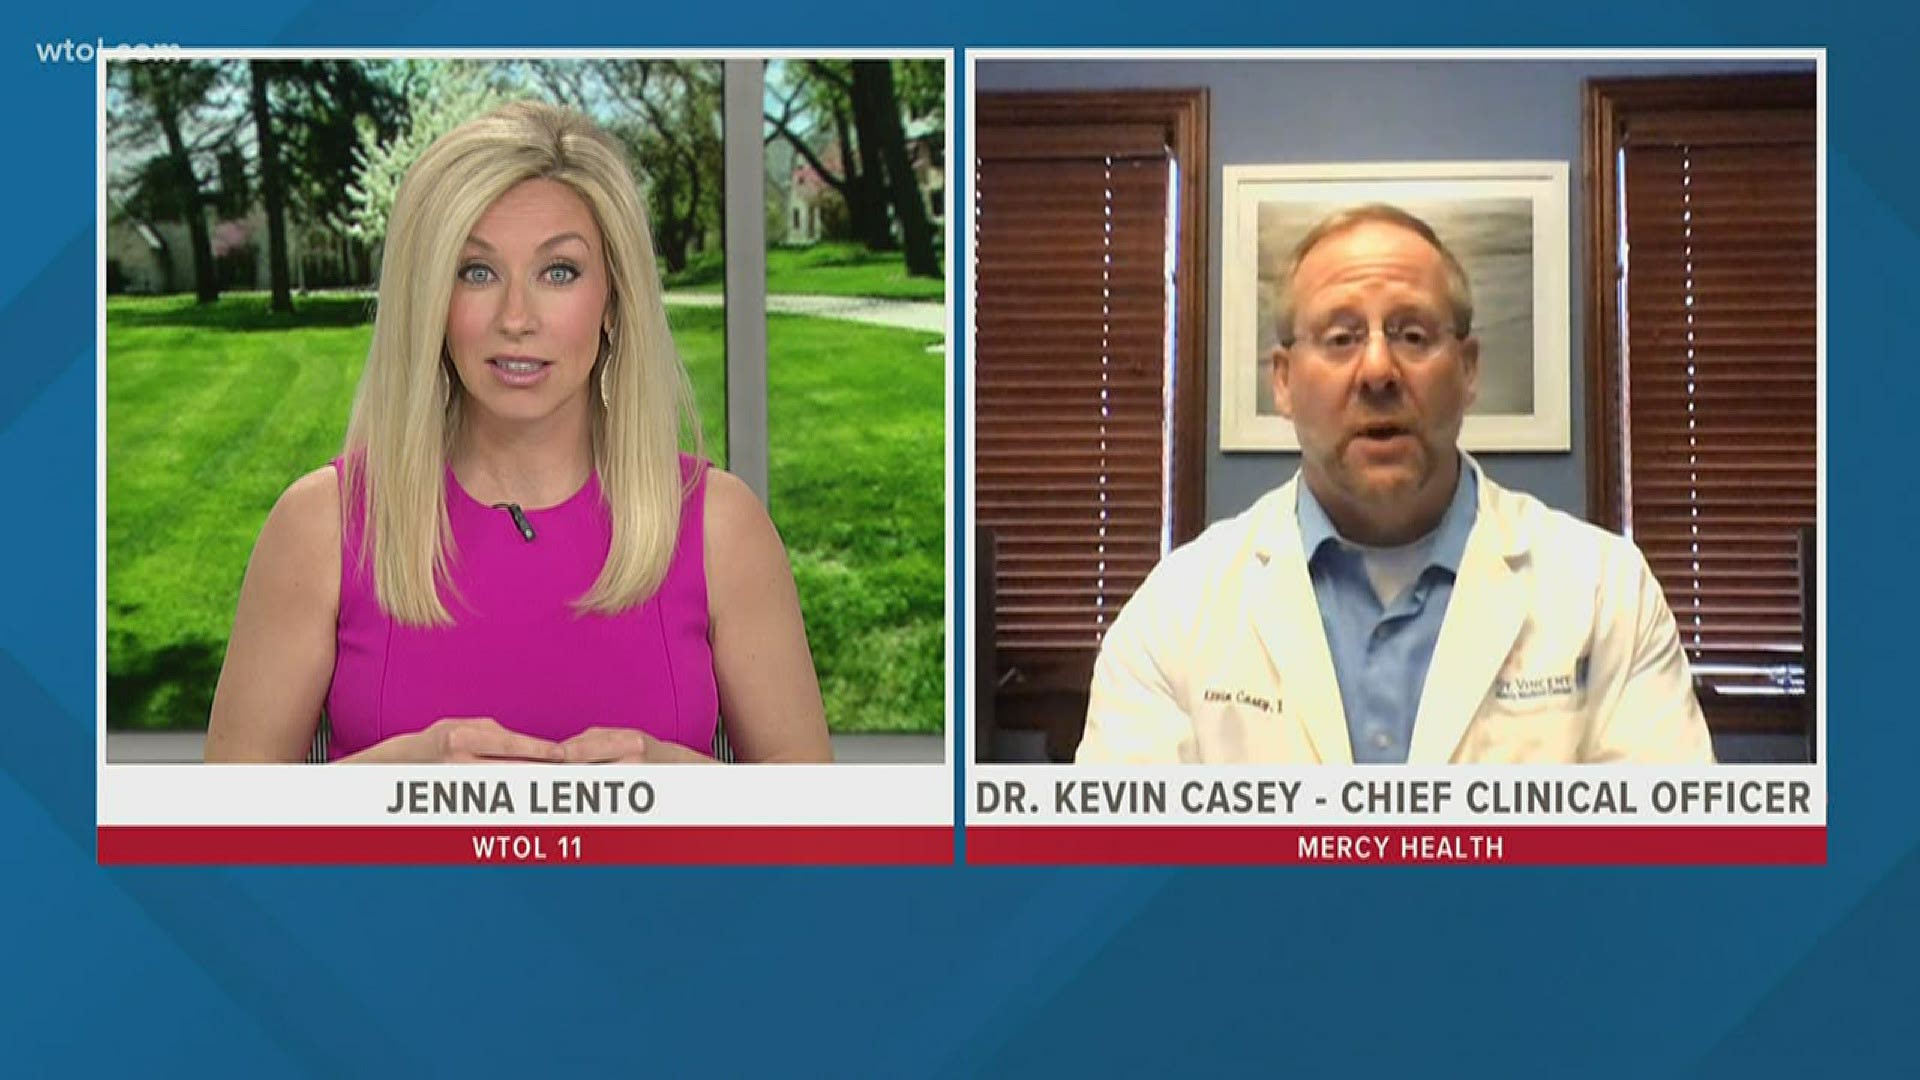 Mercy Health Chief Clinical Officer Dr. Kevin Casey gives tips and suggestions on the best social distancing practices to keep you and your family safe.